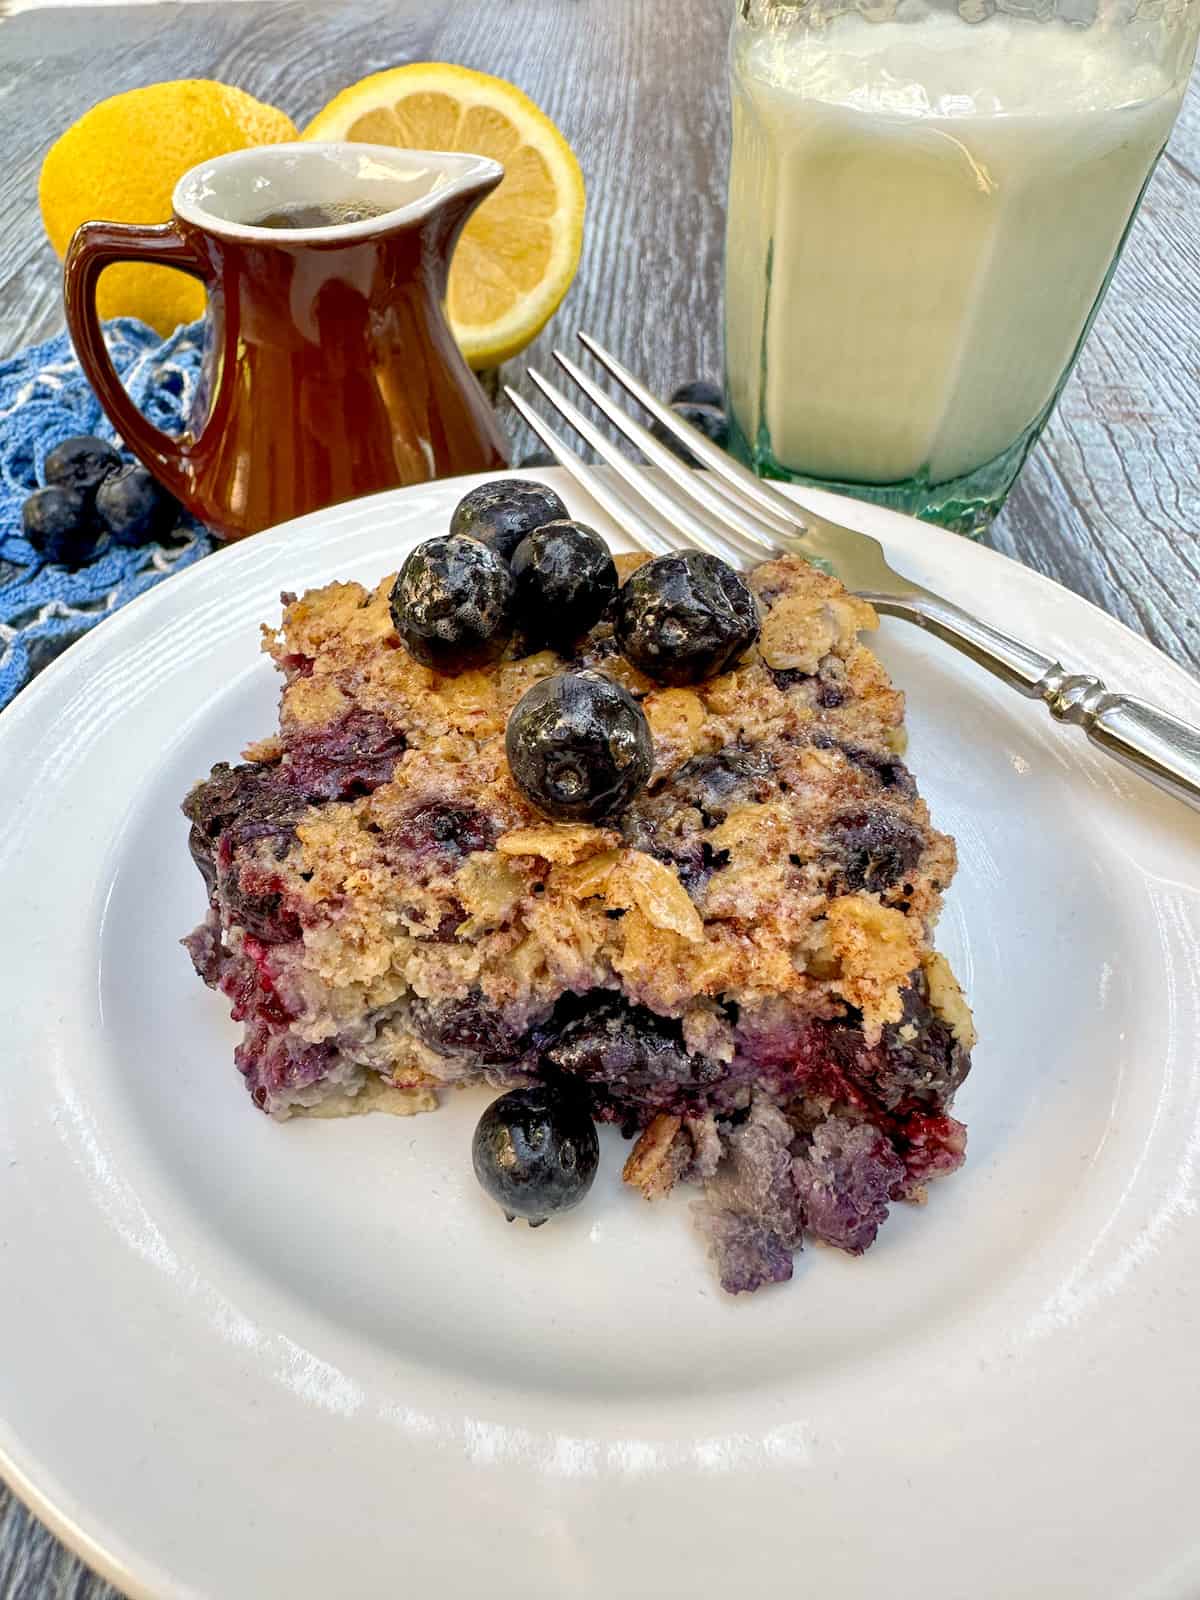 Serving of blueberry baked oatmeal on a white plate.